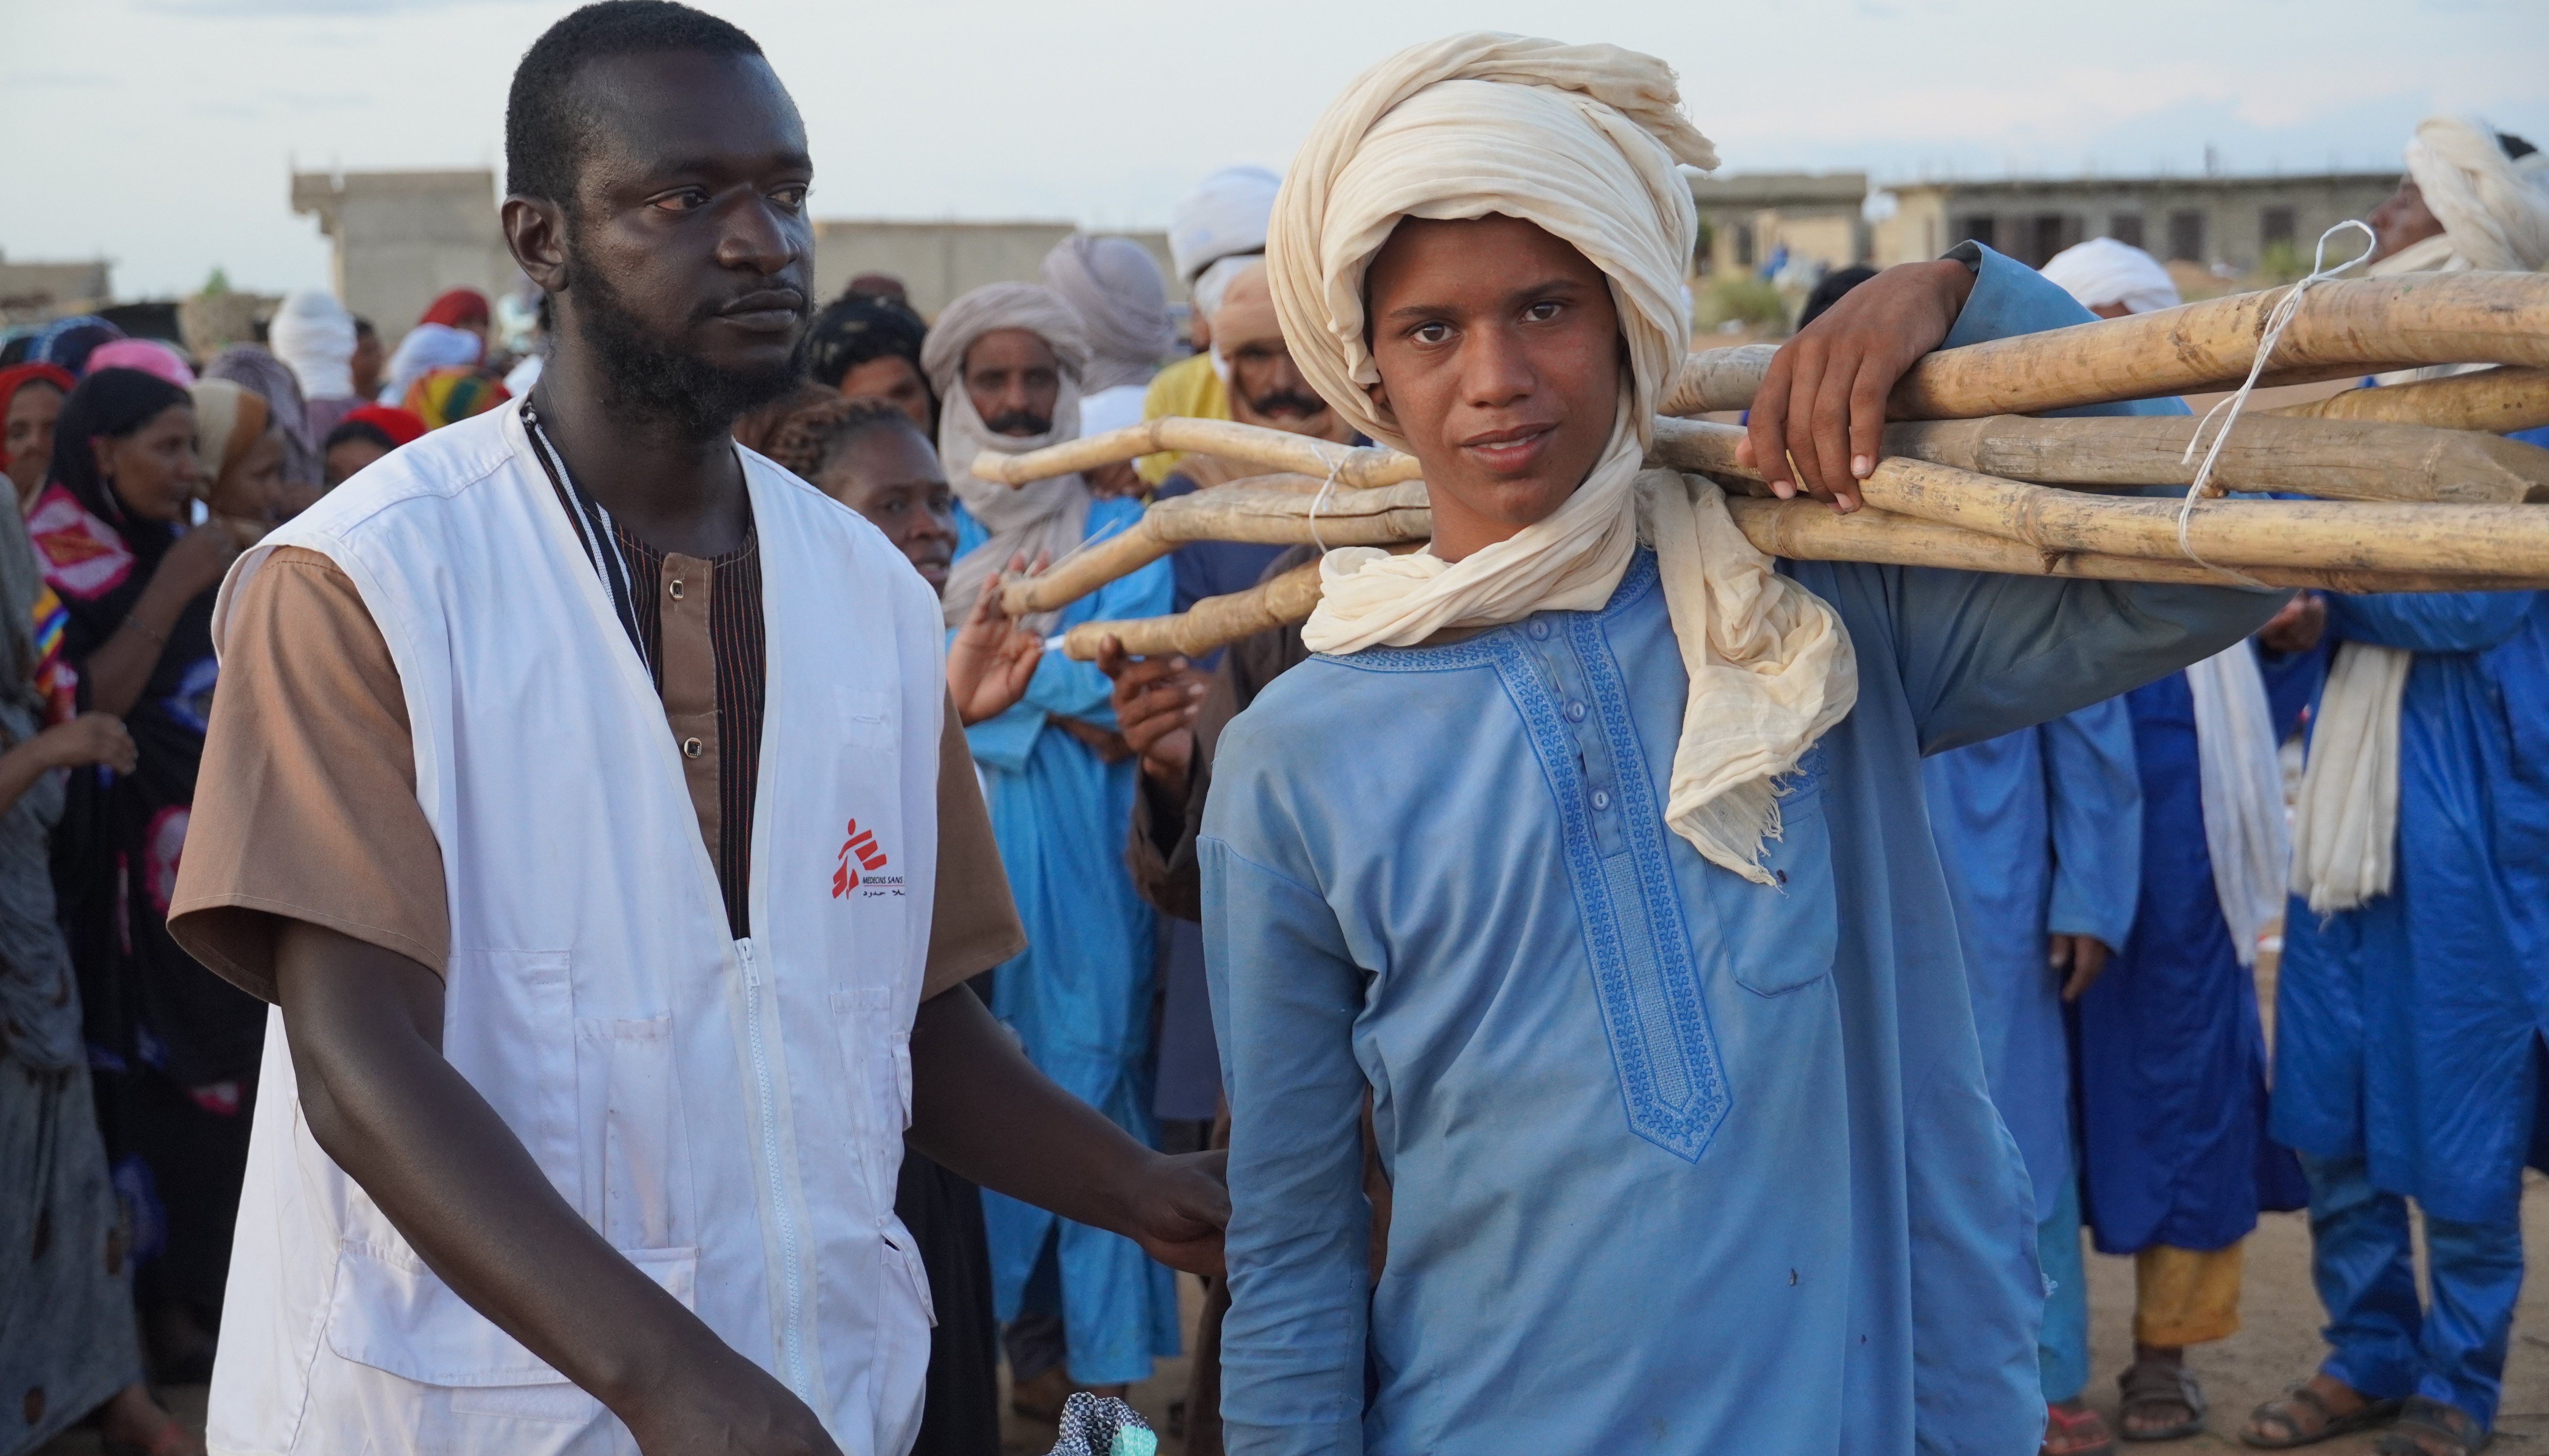 Read Responding to the urgent needs of internally displaced people in Gao by MSF